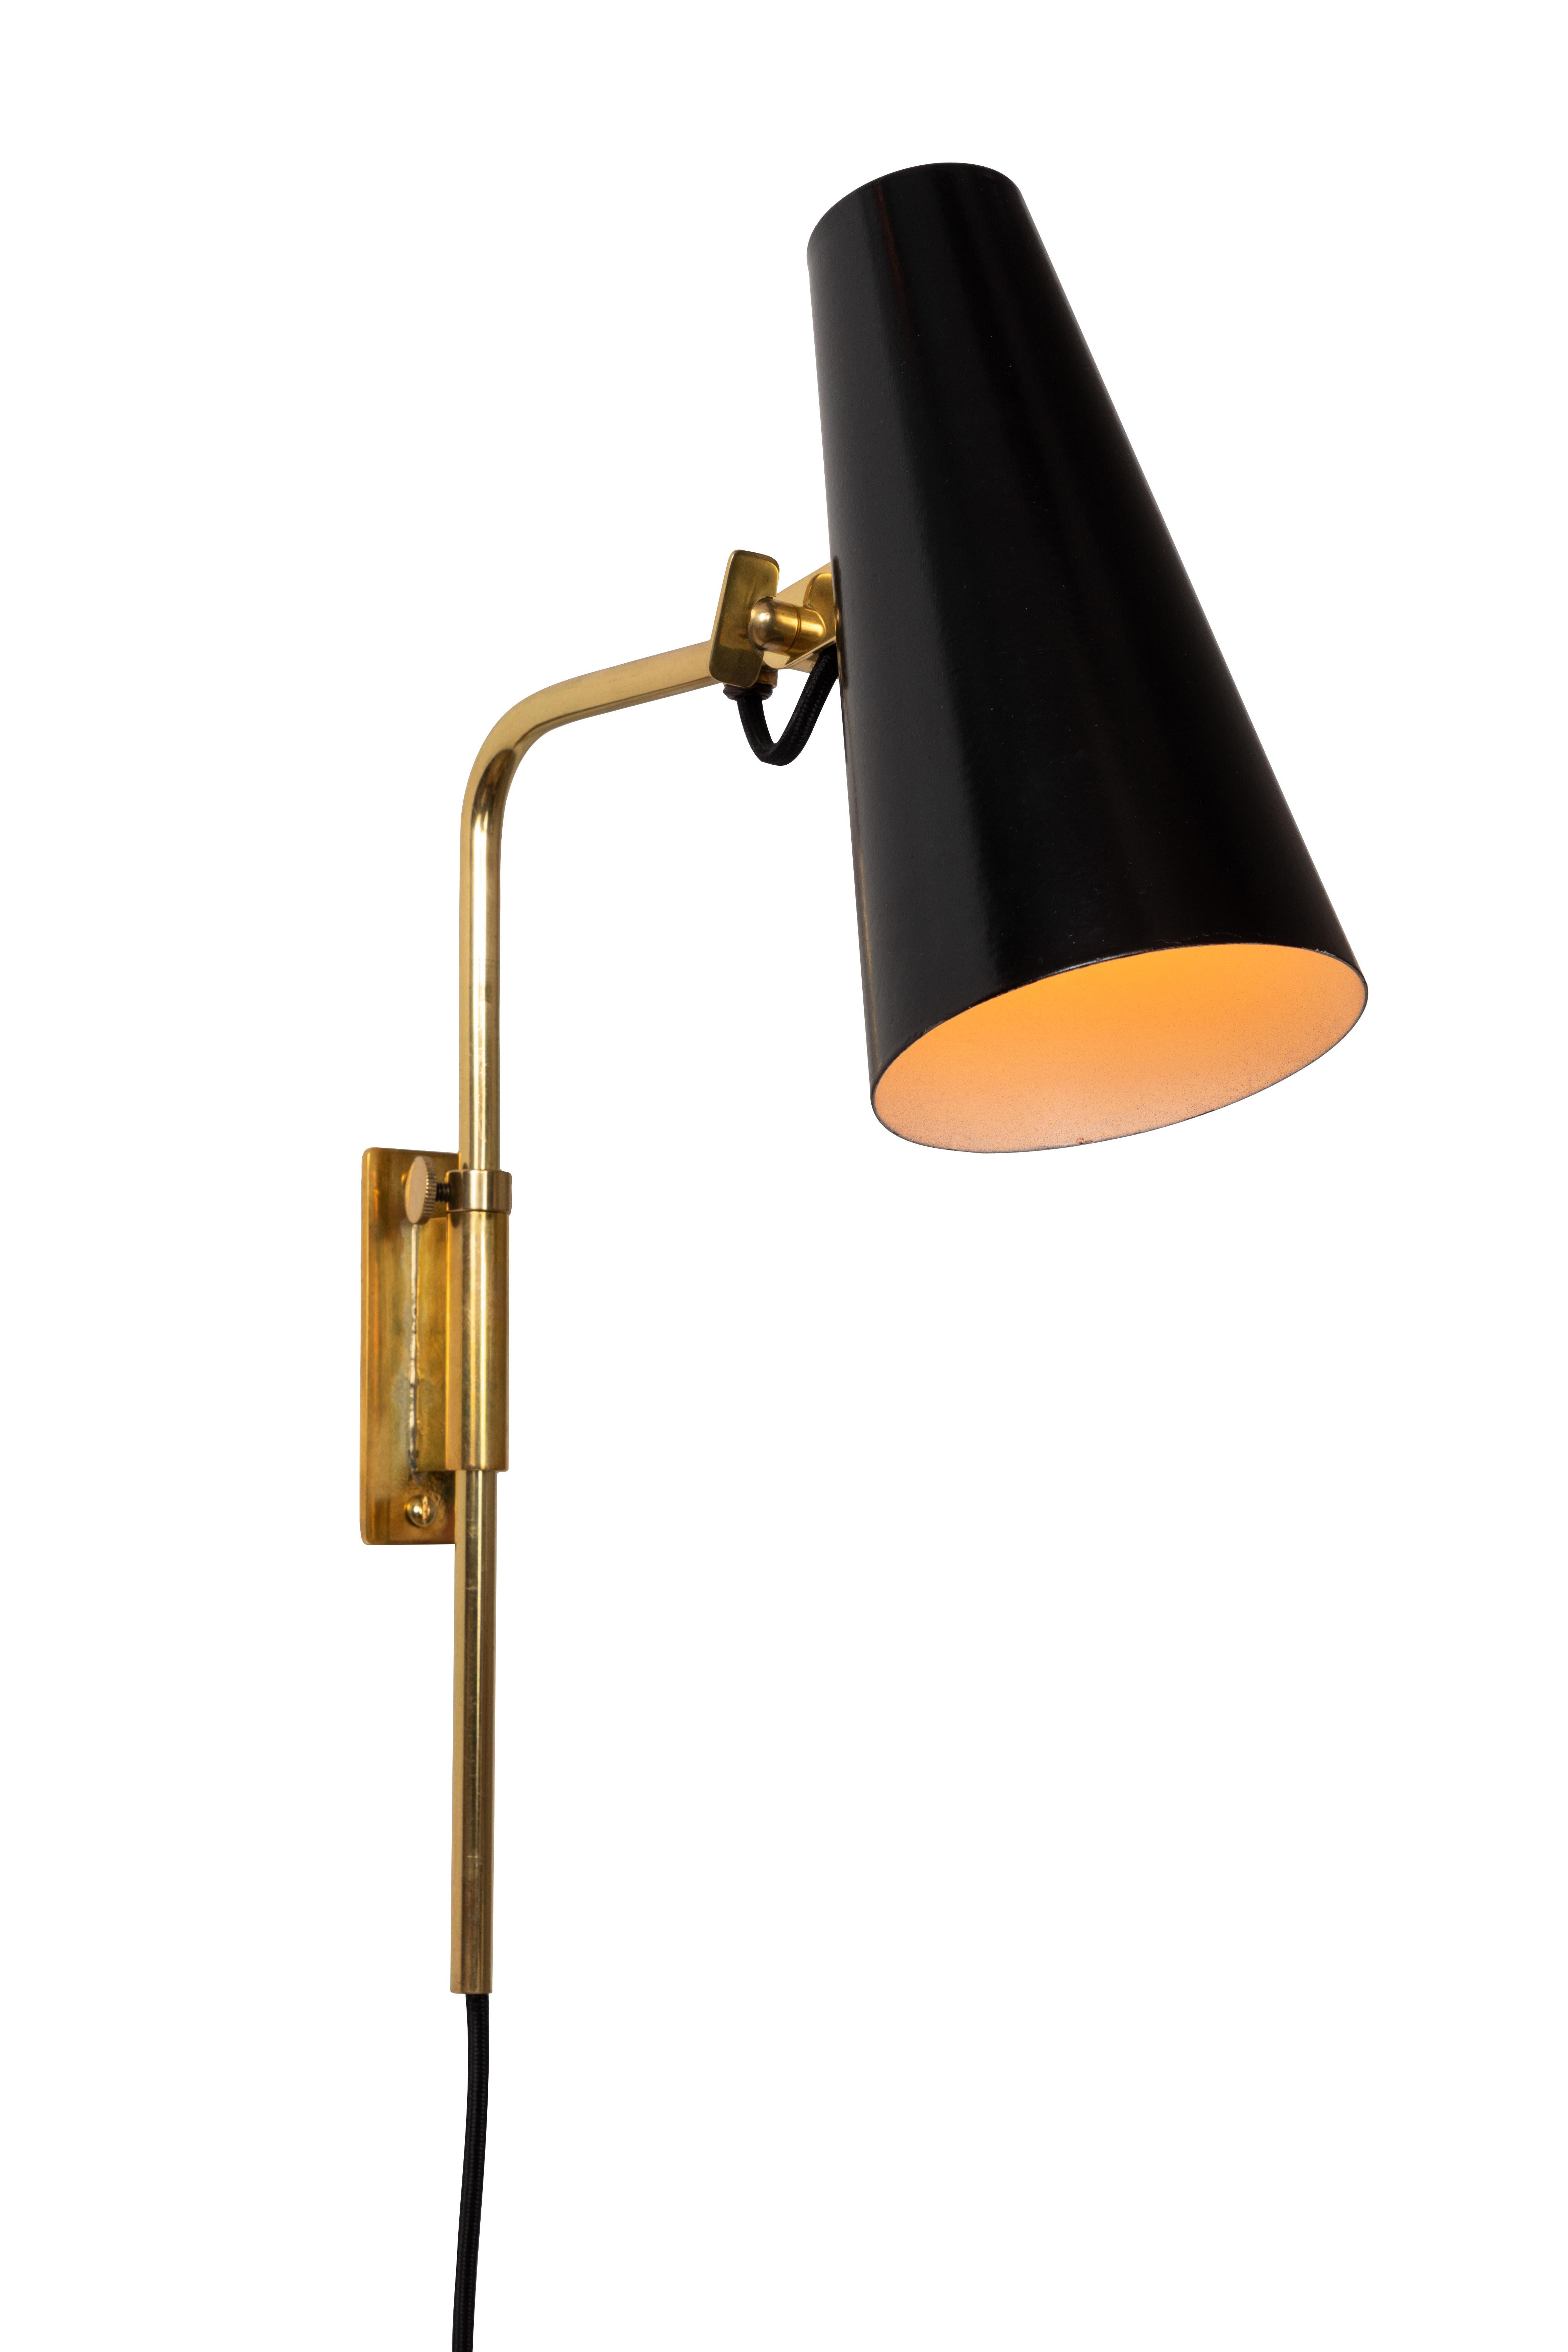 1950s Paavo Tynell 9459 wall lights for Taito OY. These rare and exceptionally refined wall lights are executed in black painted metal with attractively patinated brass armature and hardware. Signed with impressed manufacturer's mark to shade of